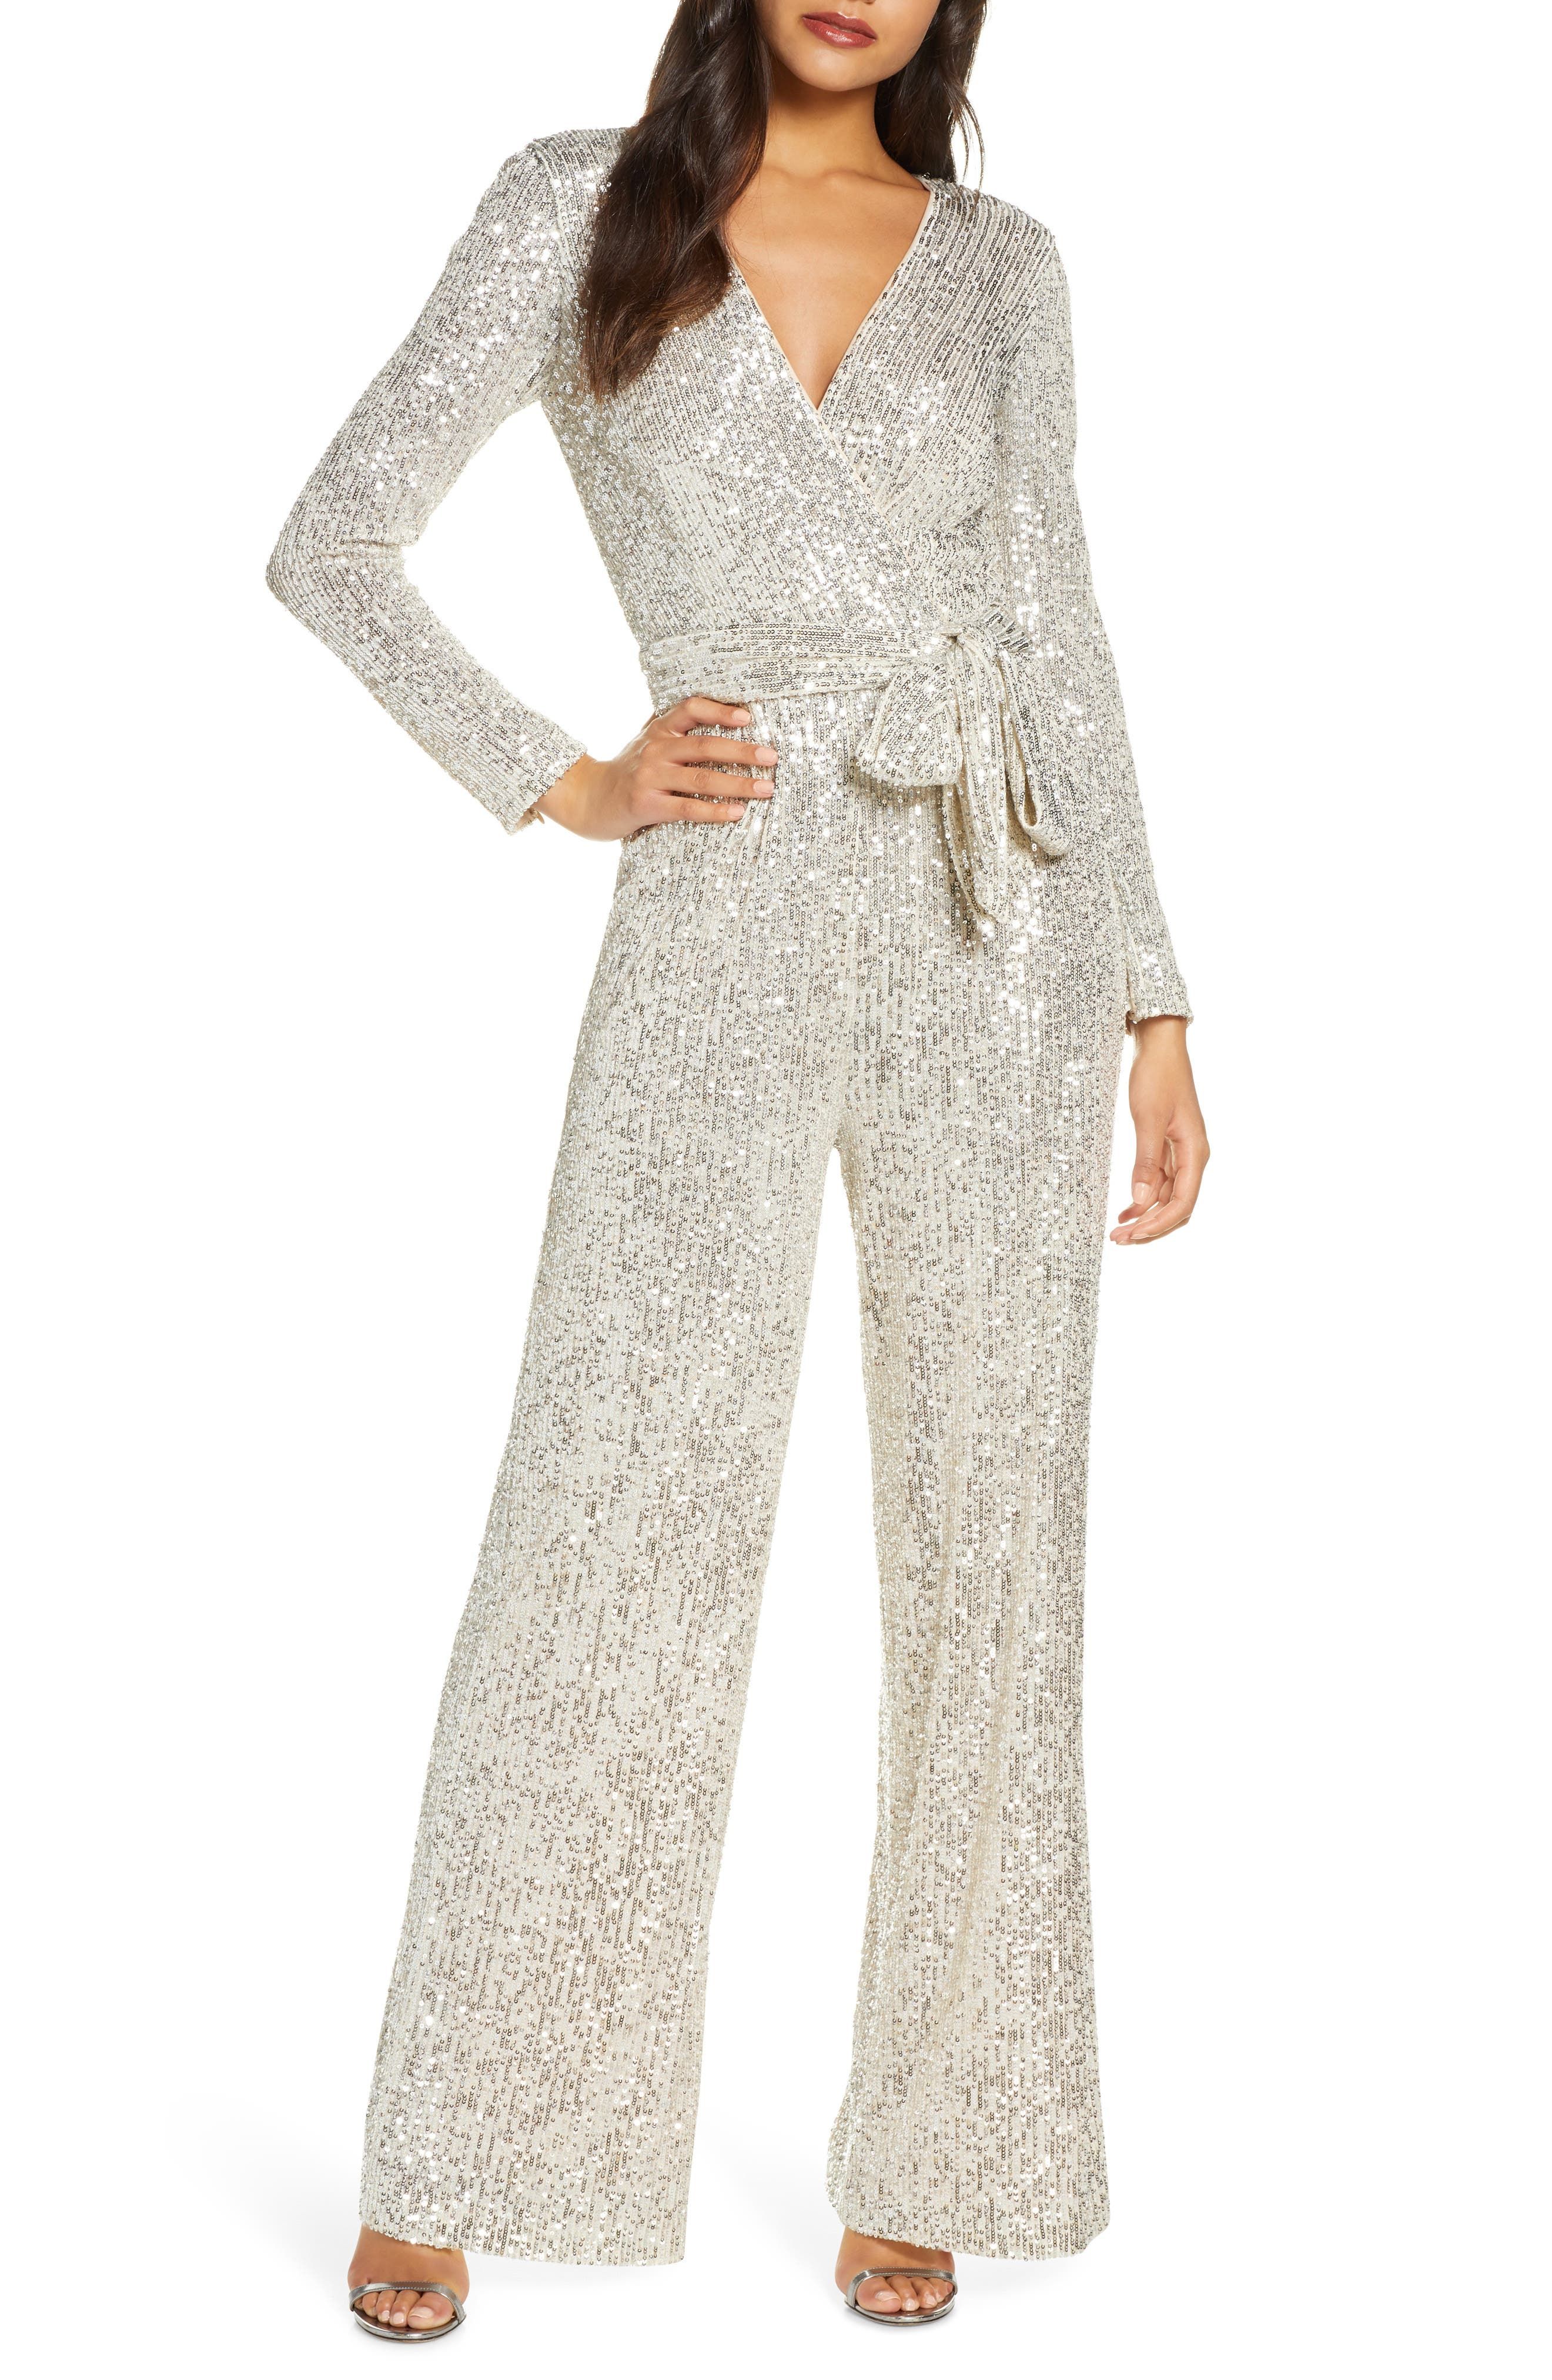 21 Dressy Jumpsuits for Wedding Guests ...